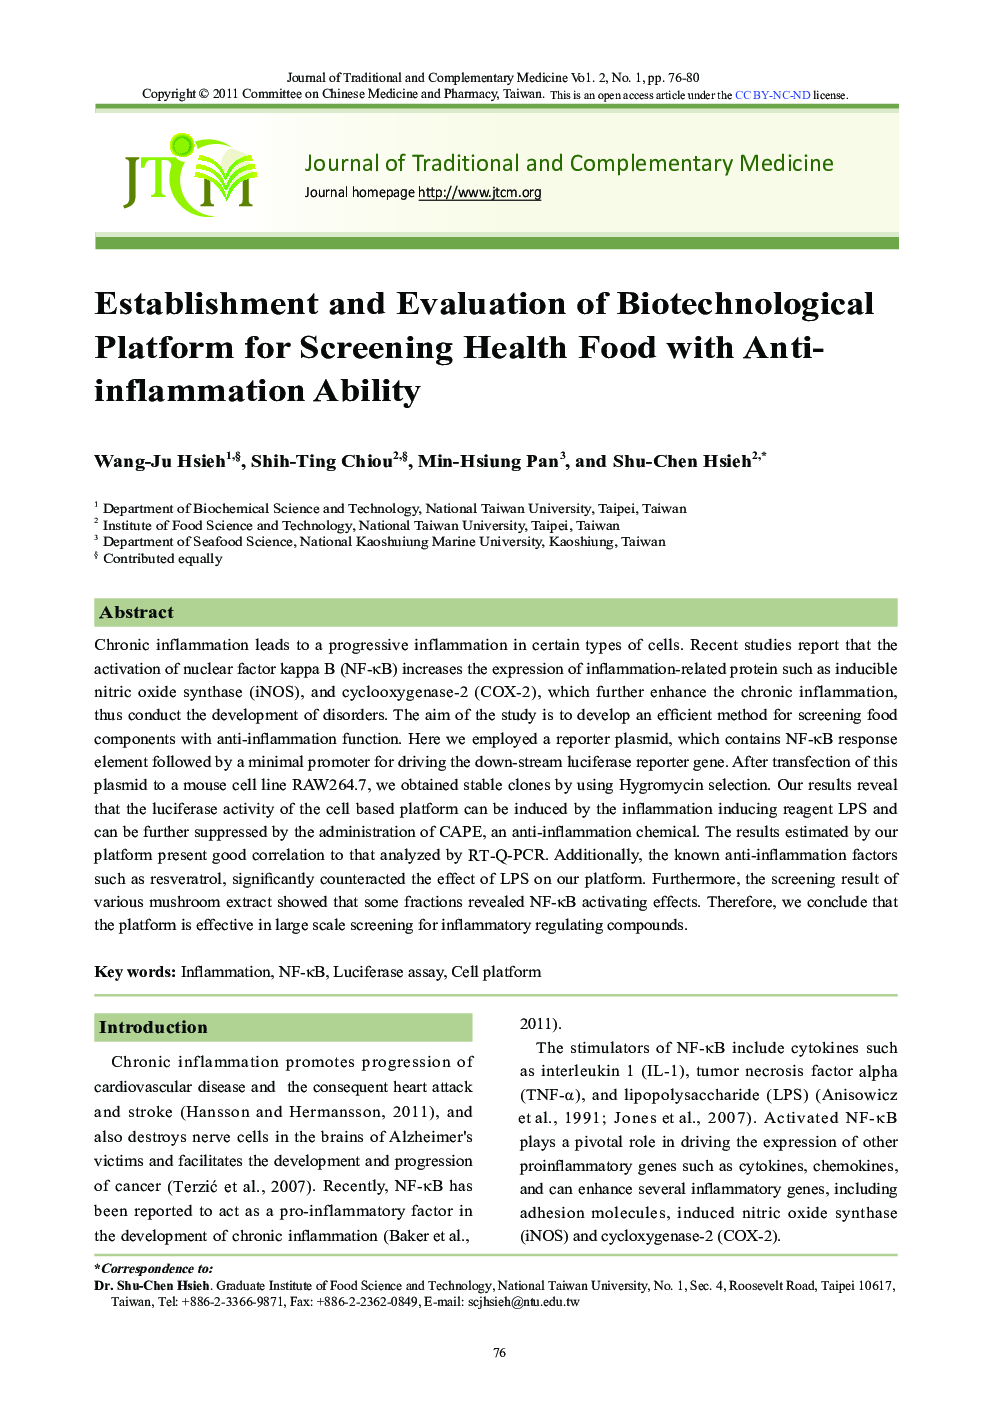 Establishment and Evaluation of Biotechnological Platform for Screening Health Food with Antiinflammation Ability